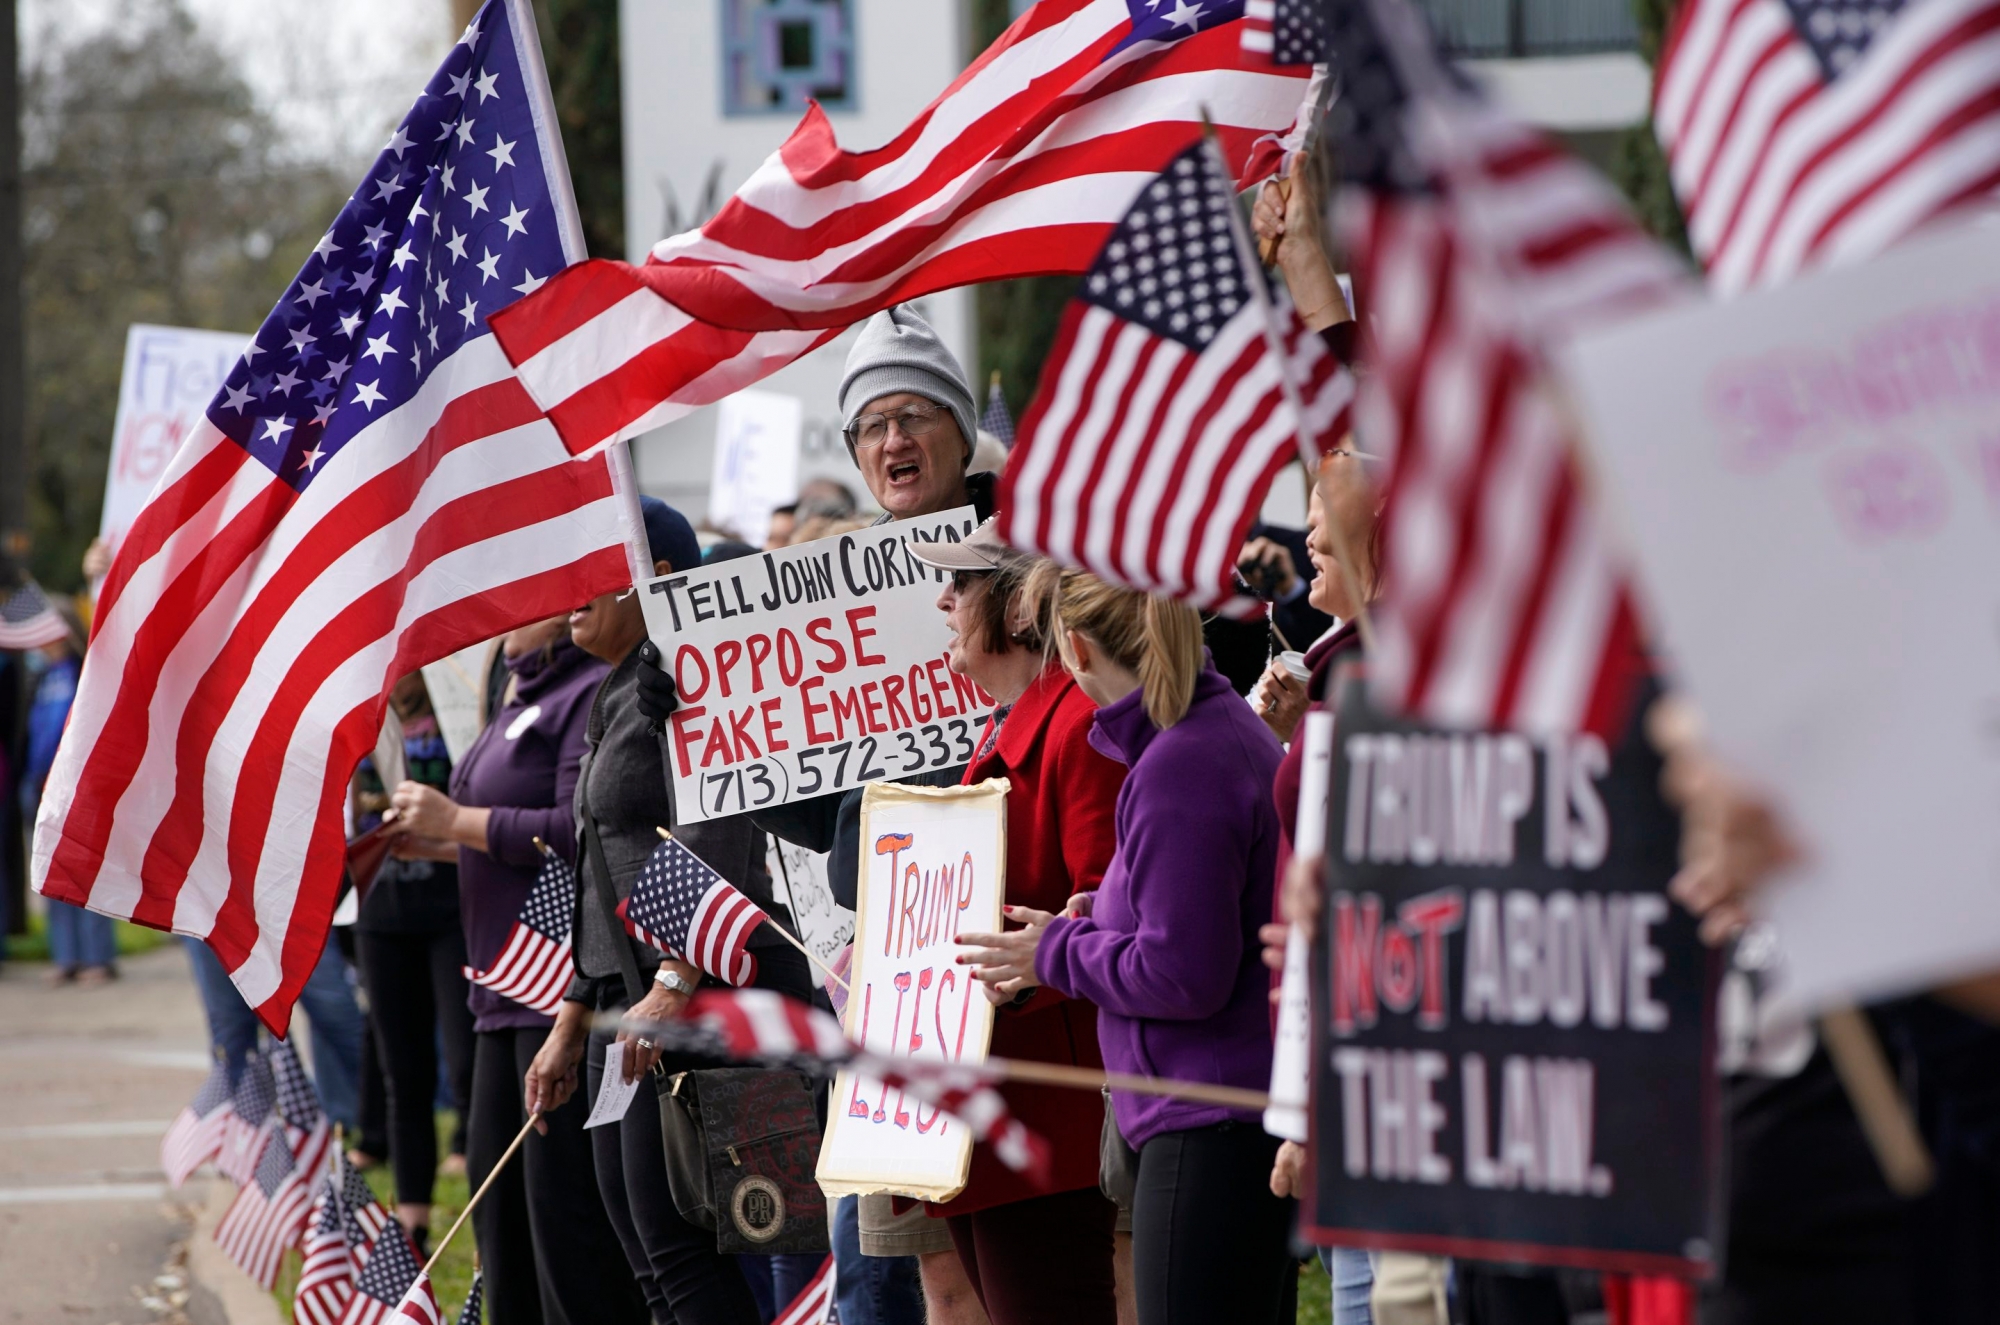 Alex McDonald of Houston, center, stands among protesters rallying along Memorial Drive outside the Houston office of Senator John Cornyn Monday, Feb. 18, 2019, in Houston. The event was part of nationwide protests against the national emergency declaration by President Donald Trump. (Melissa Phillip/Houston Chronicle via AP) Cornyn Protest